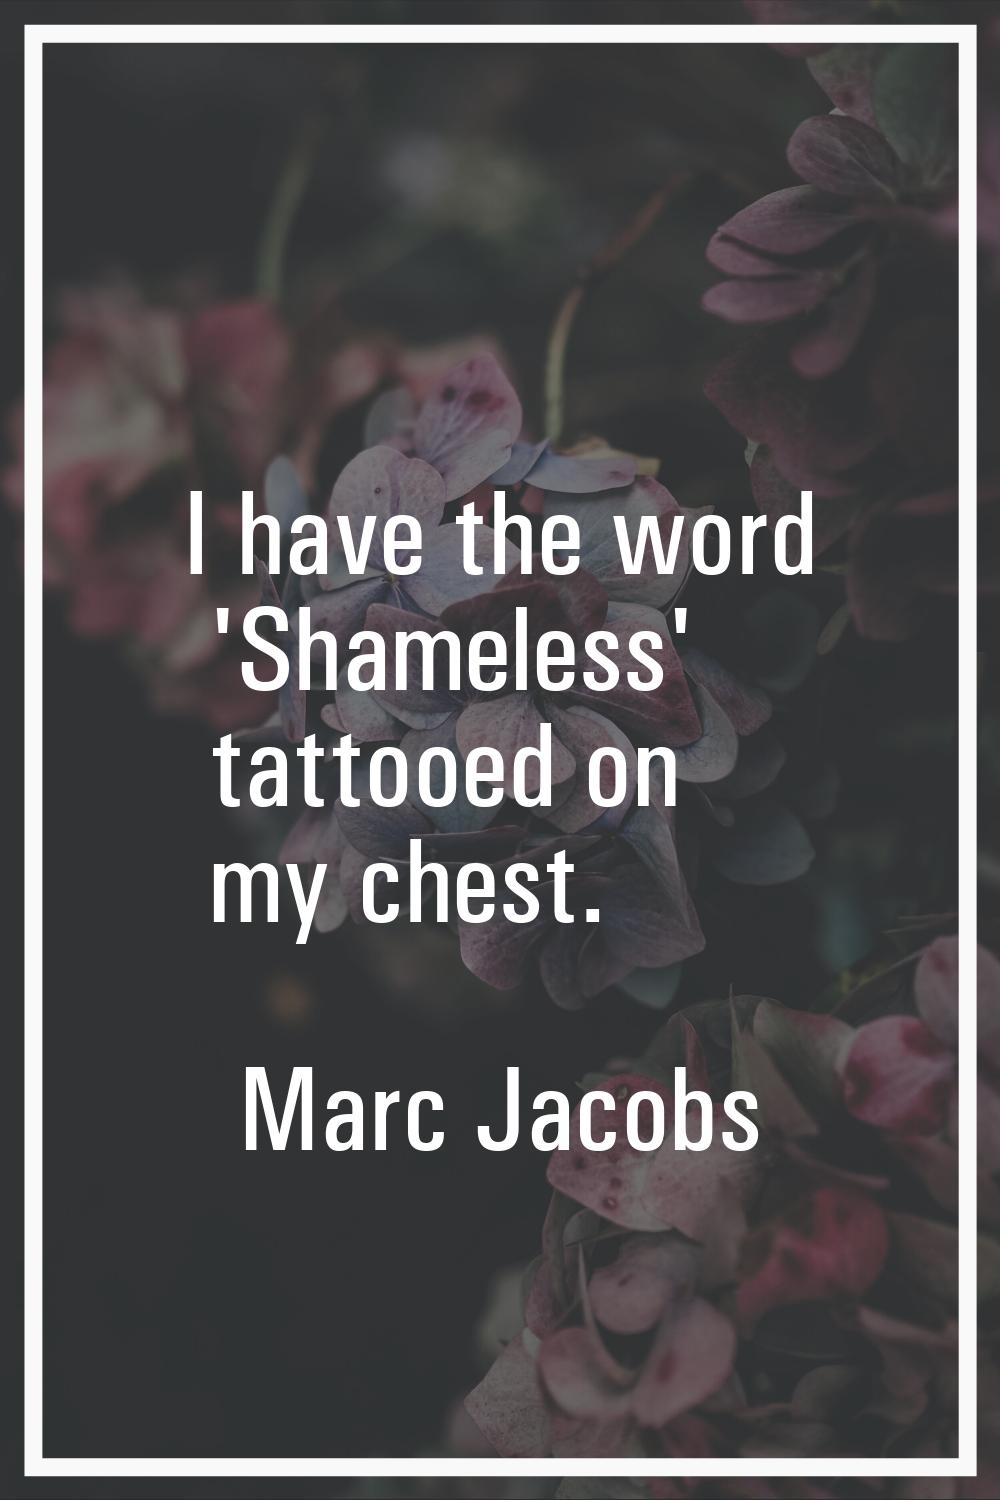 I have the word 'Shameless' tattooed on my chest.